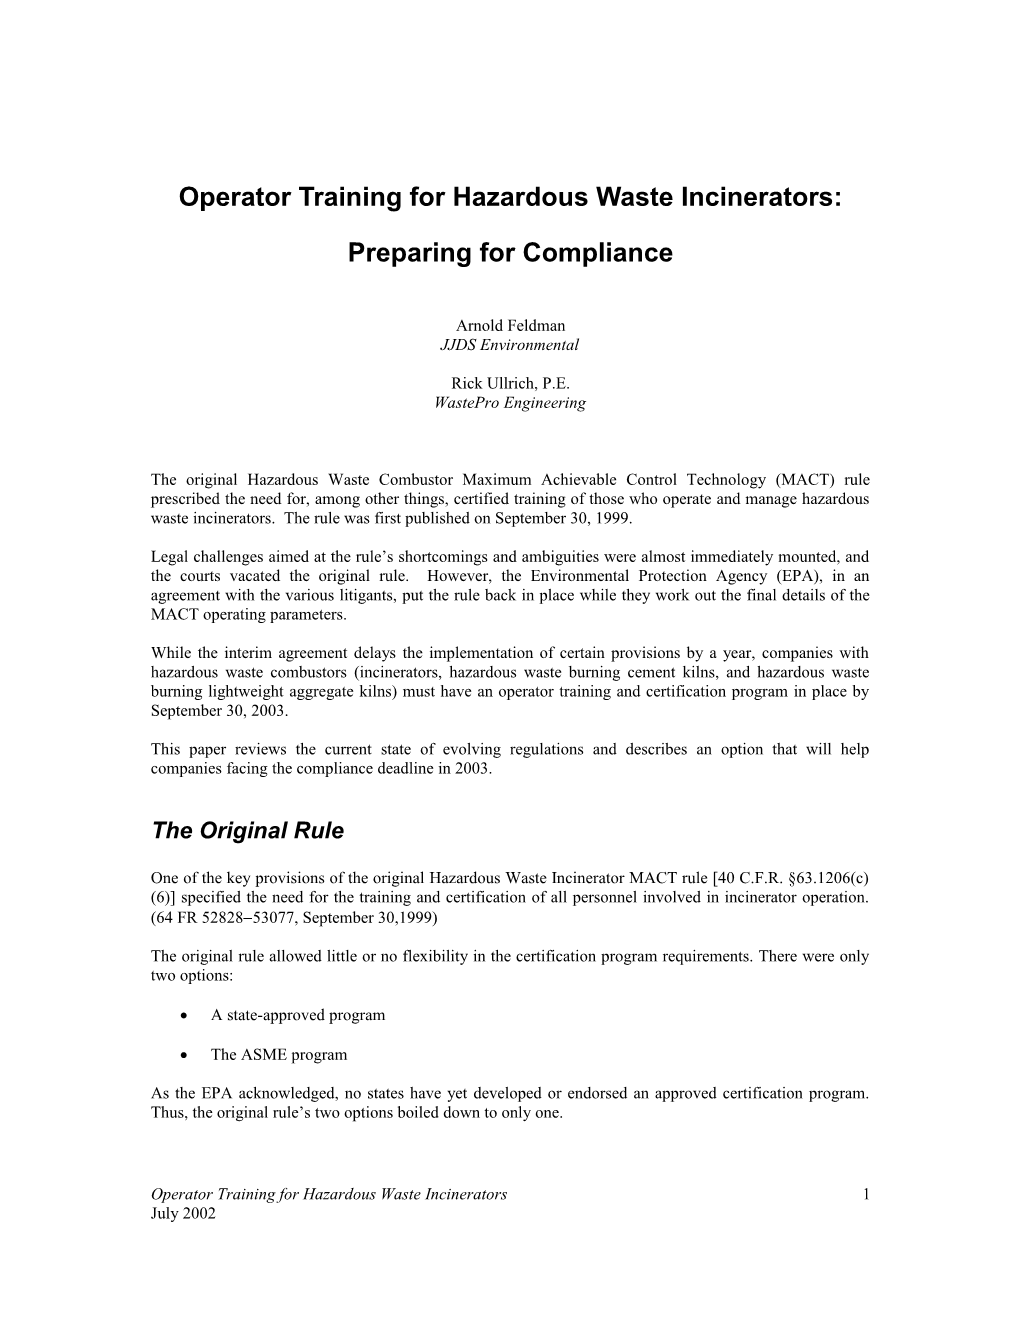 One of the Provisions of the Hazardous Waste Incincinerator MACT Rule (40 C